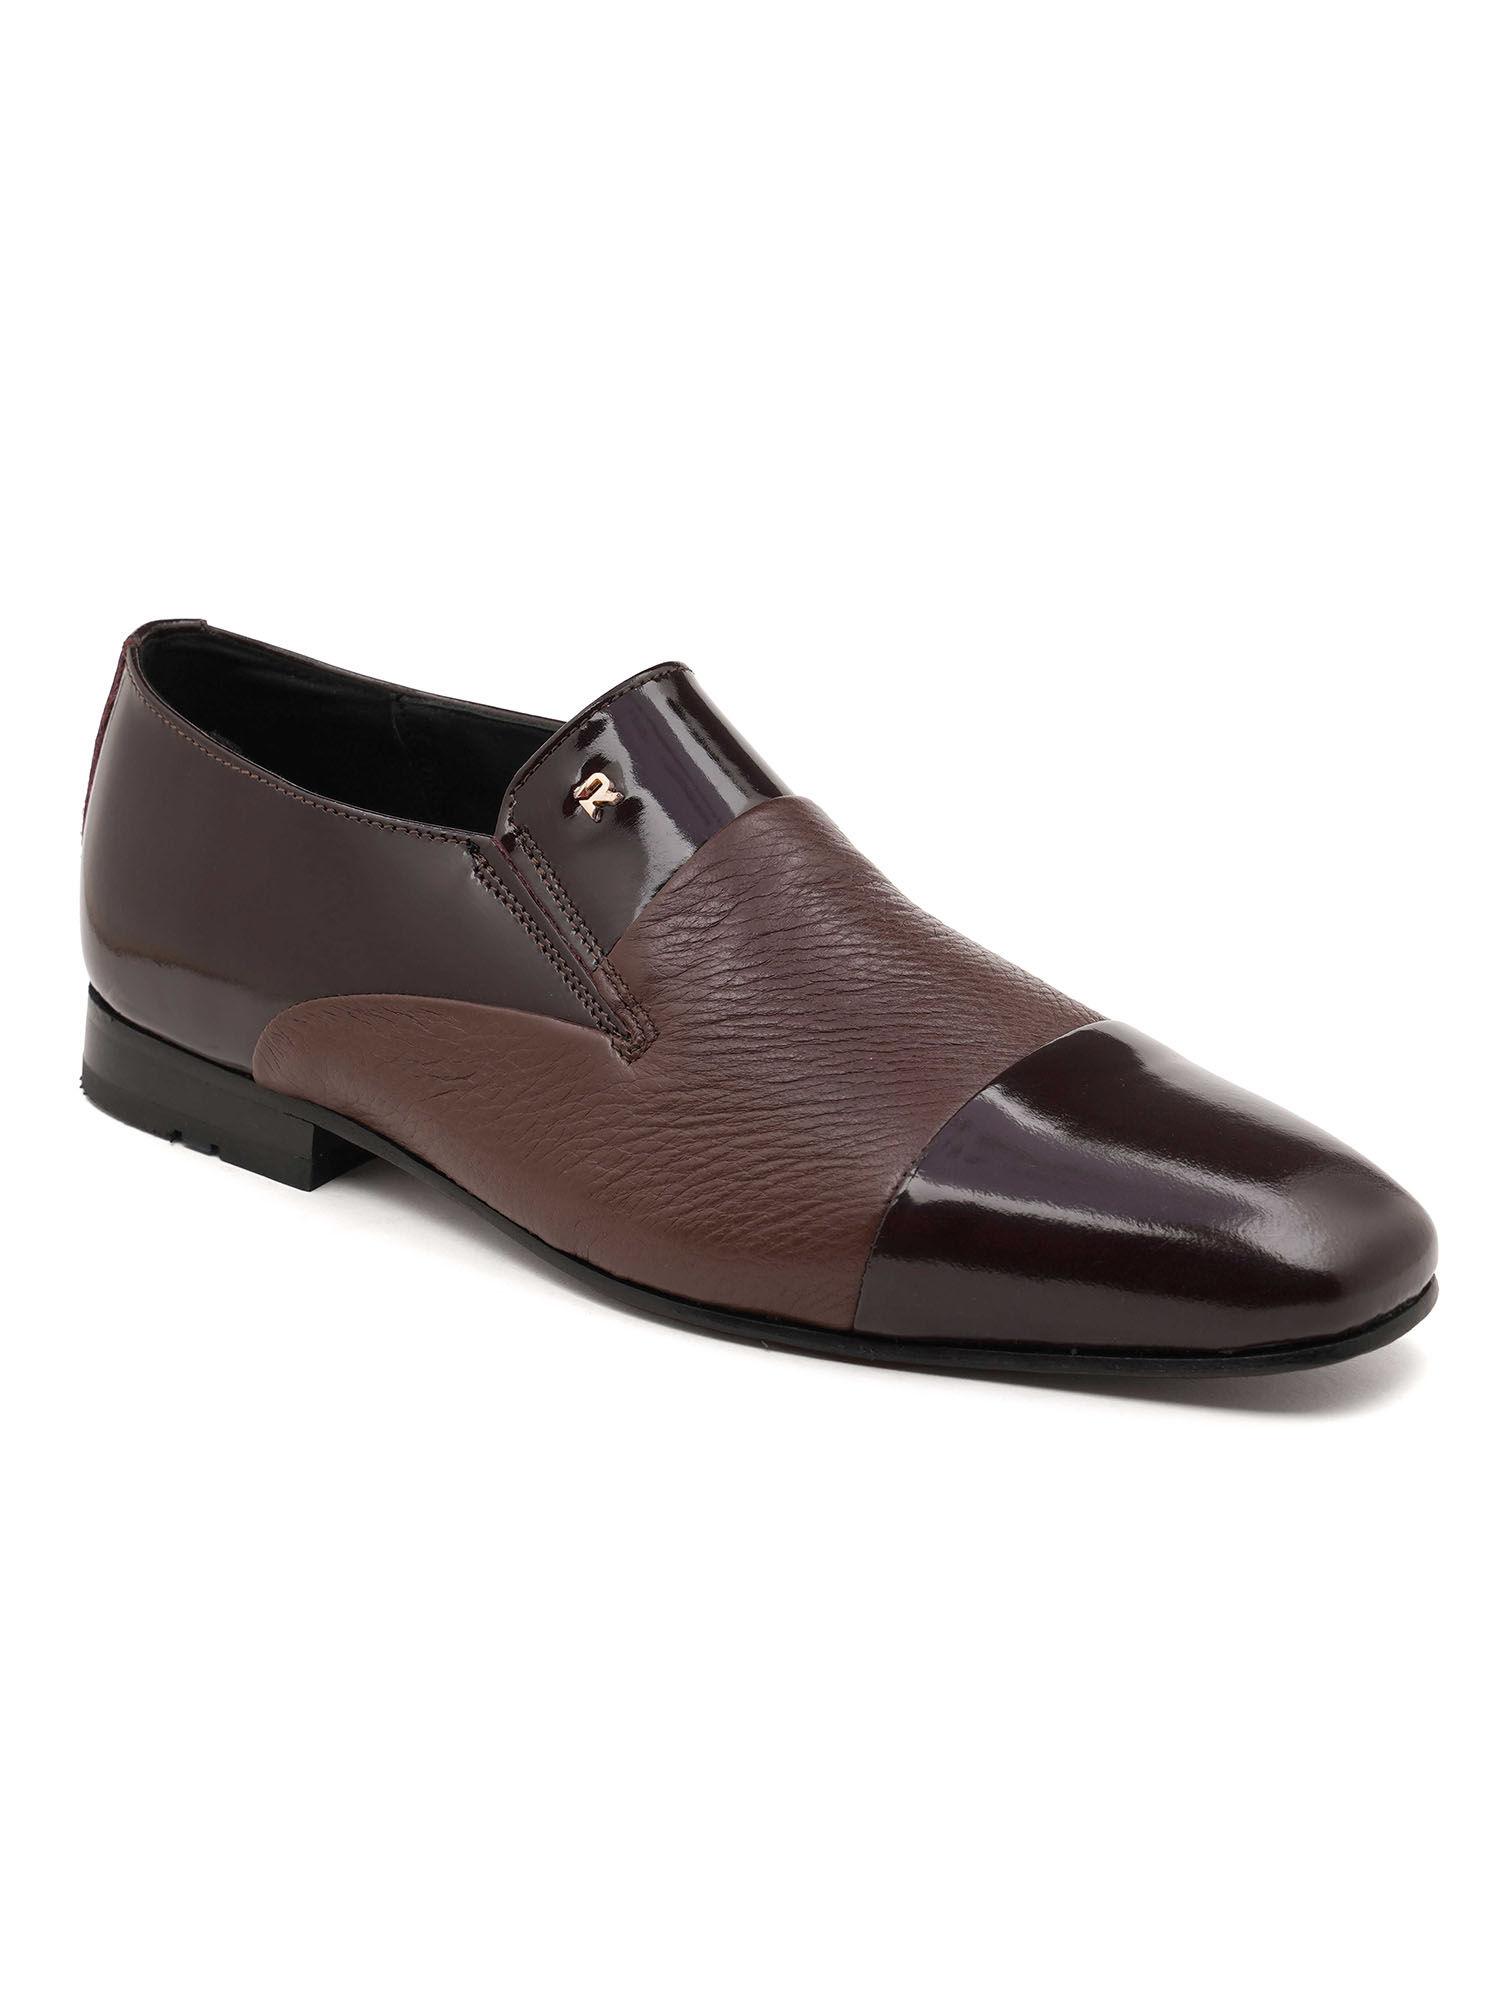 burgundy-occasion-slip-on-loafers